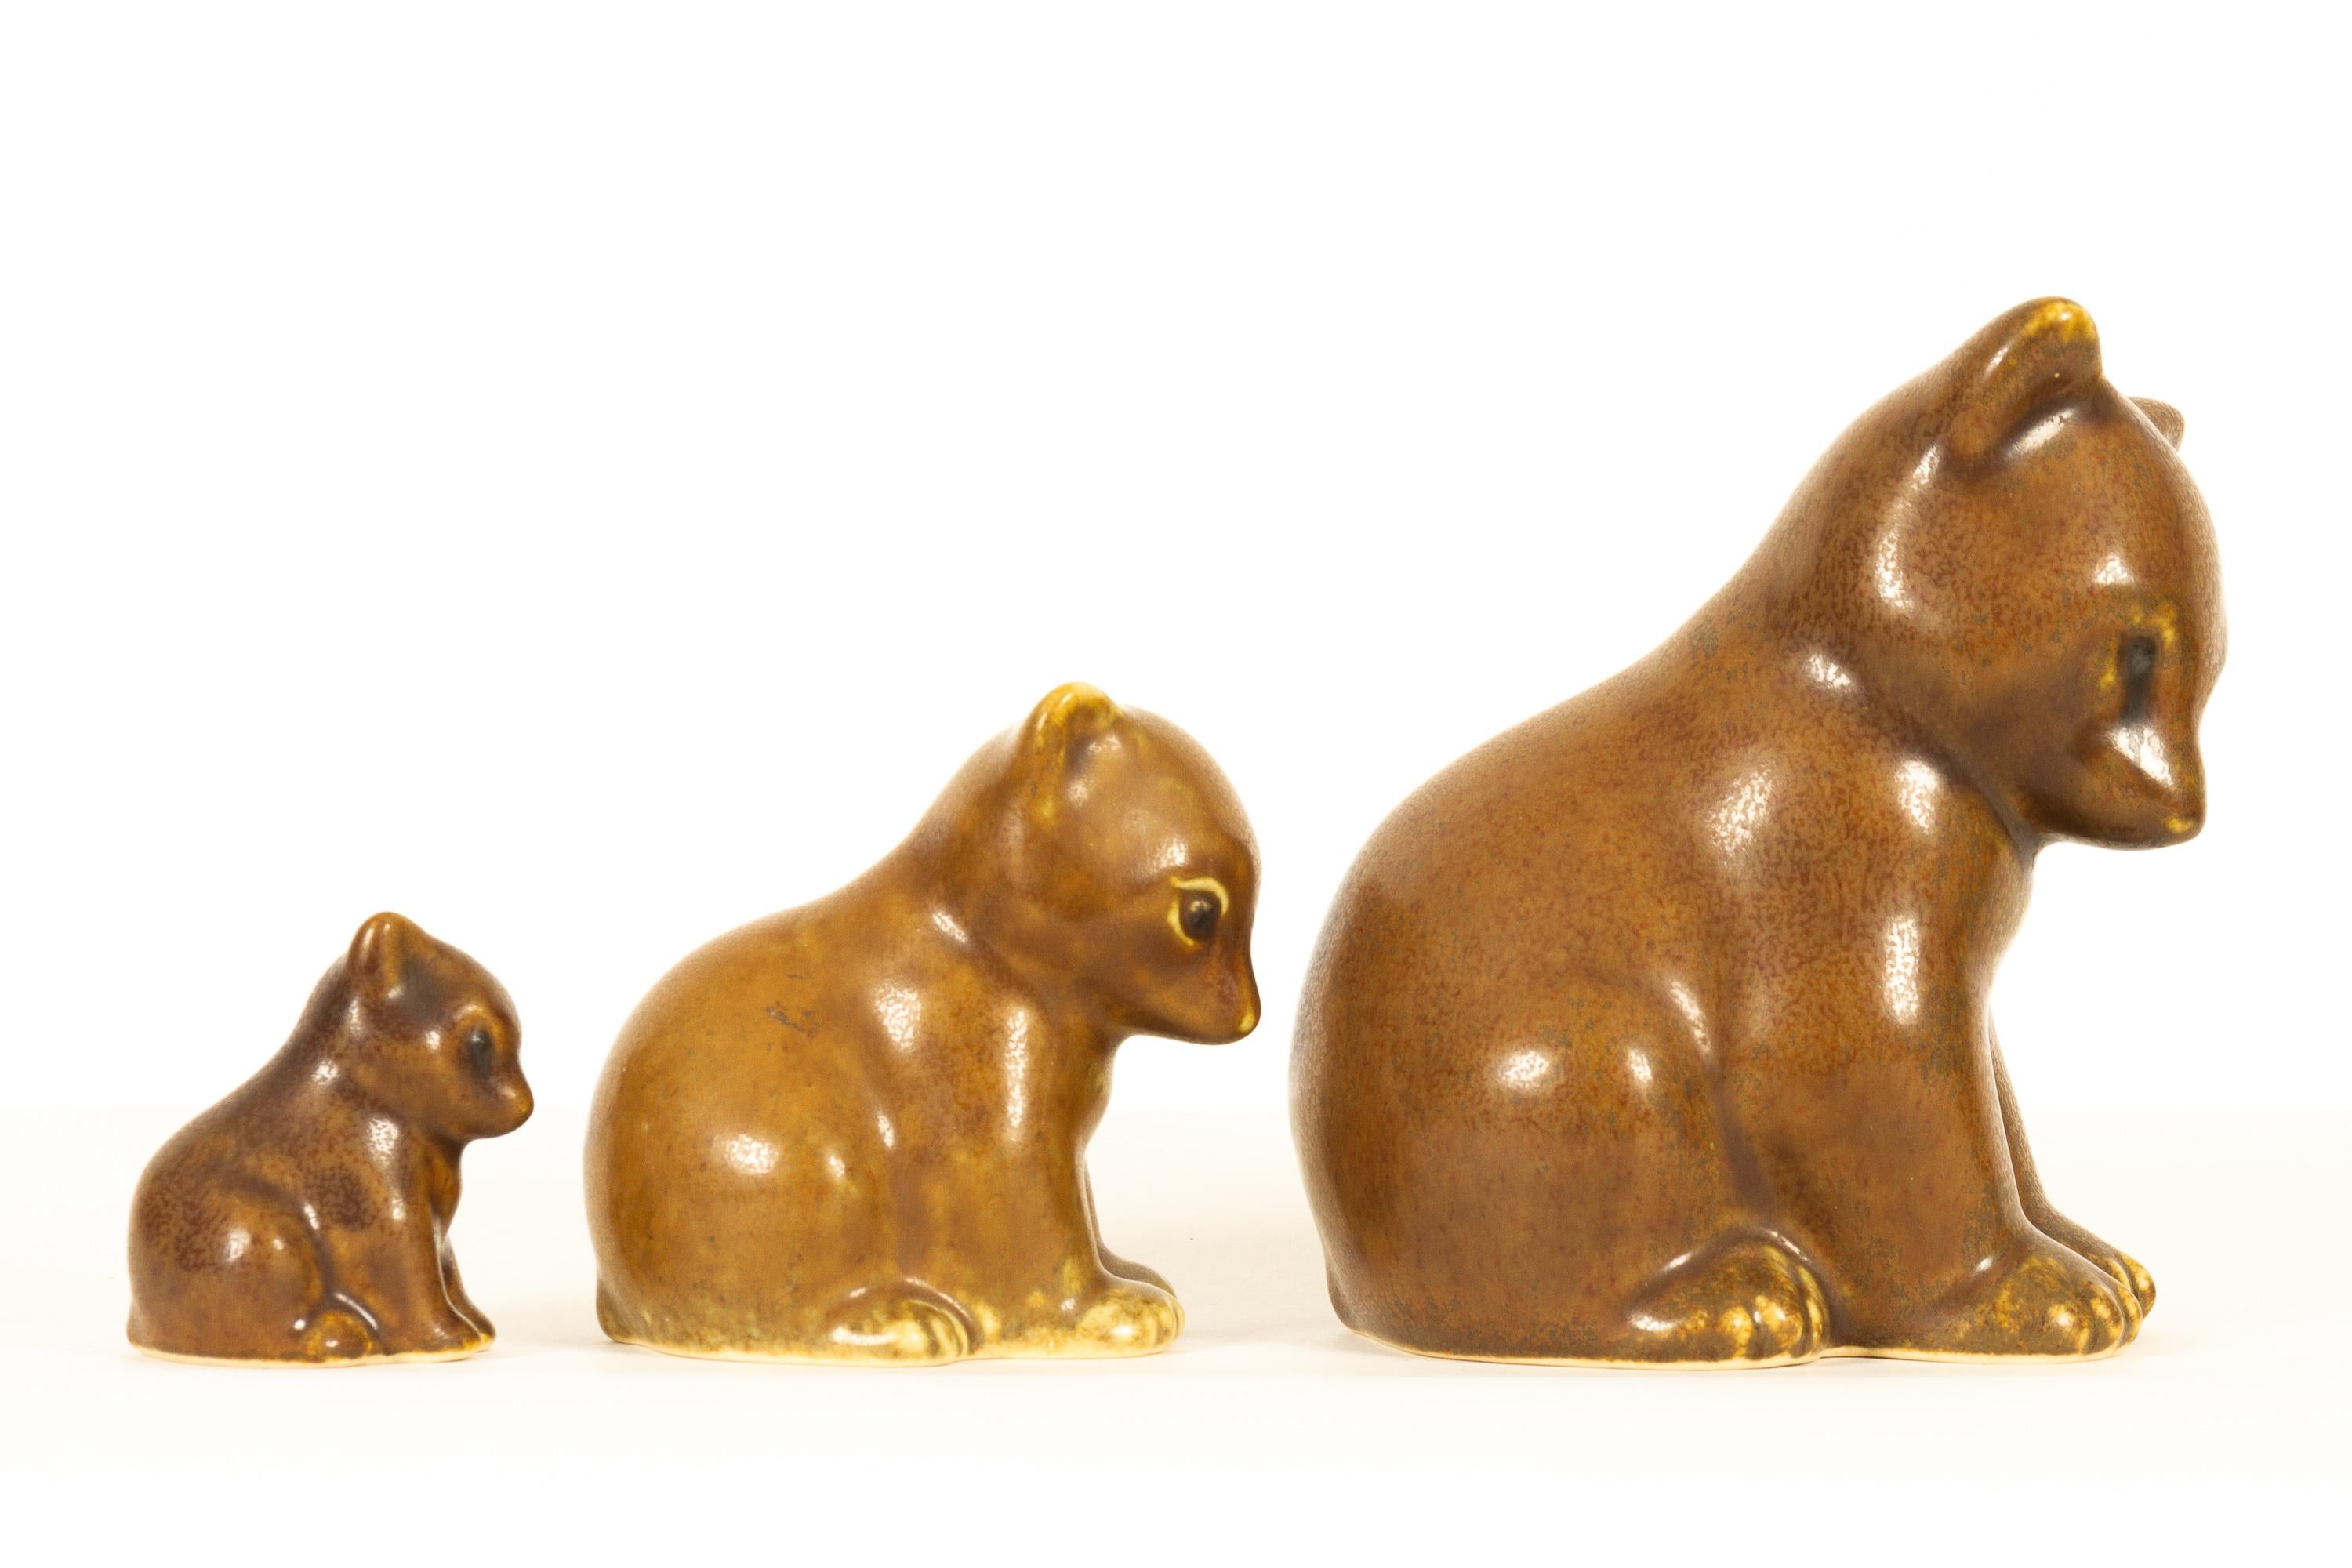 Danish bear figurines by Knud Basse 1950s, set of 3.
Three ceramic figurines of bears in different sizes. Beautiful glaze and very adorable expression by excellent Danish midcentury ceramist Knud Basse.
Measures: Heights 6, 9 and 14 cm. Very good